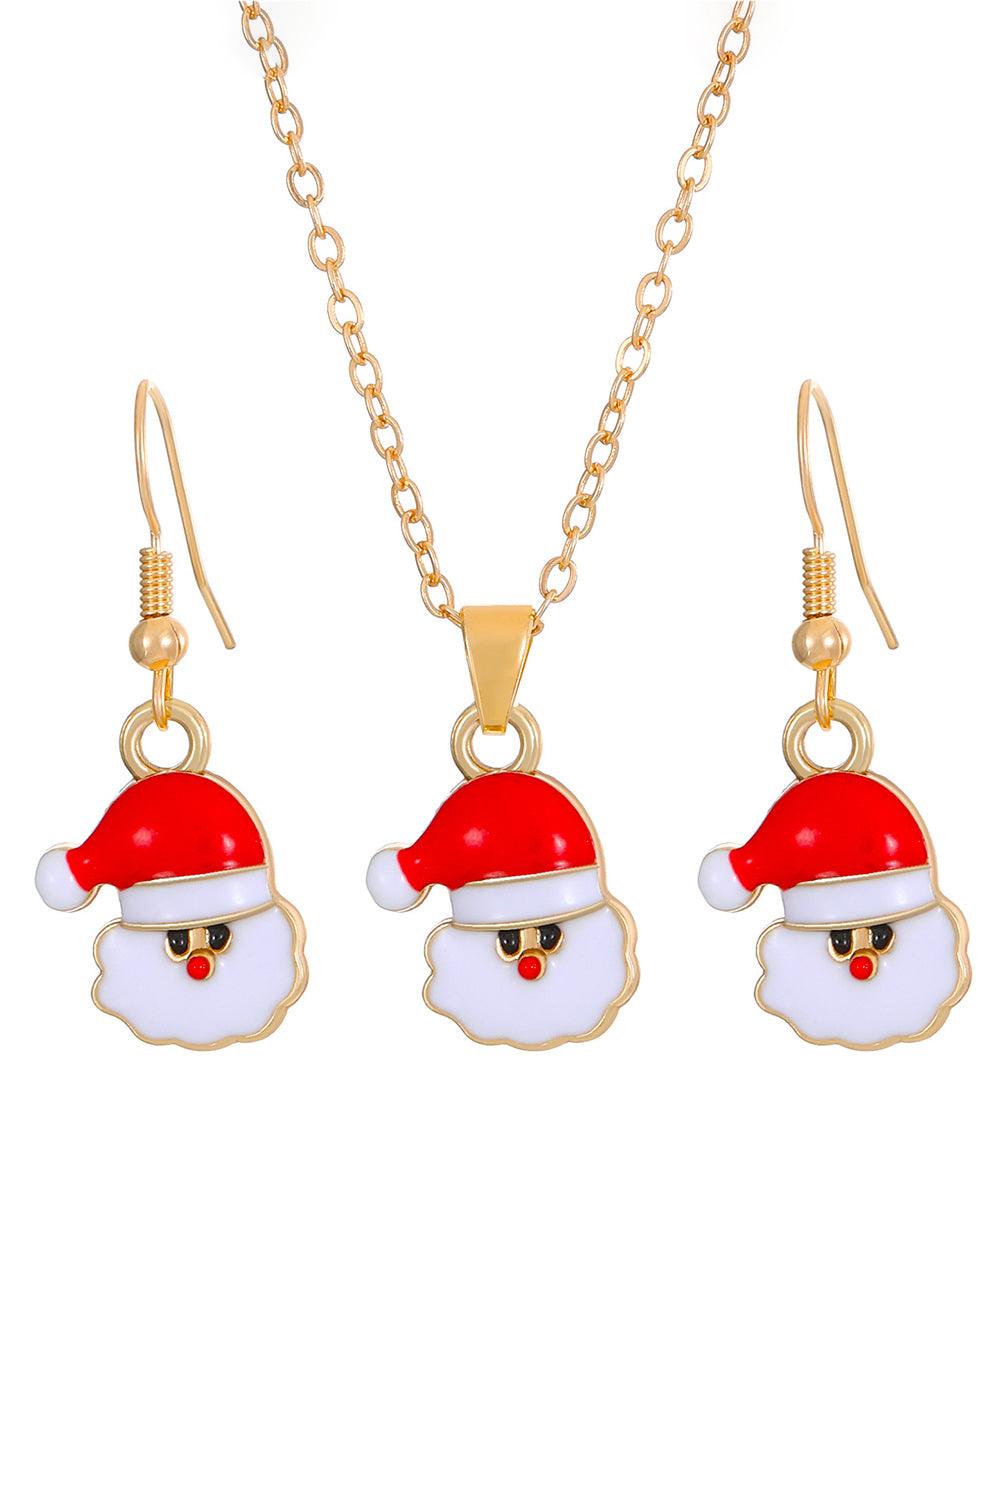 Fiery Red Christmas Santa Claus Earrings and Necklace Set - L & M Kee, LLC